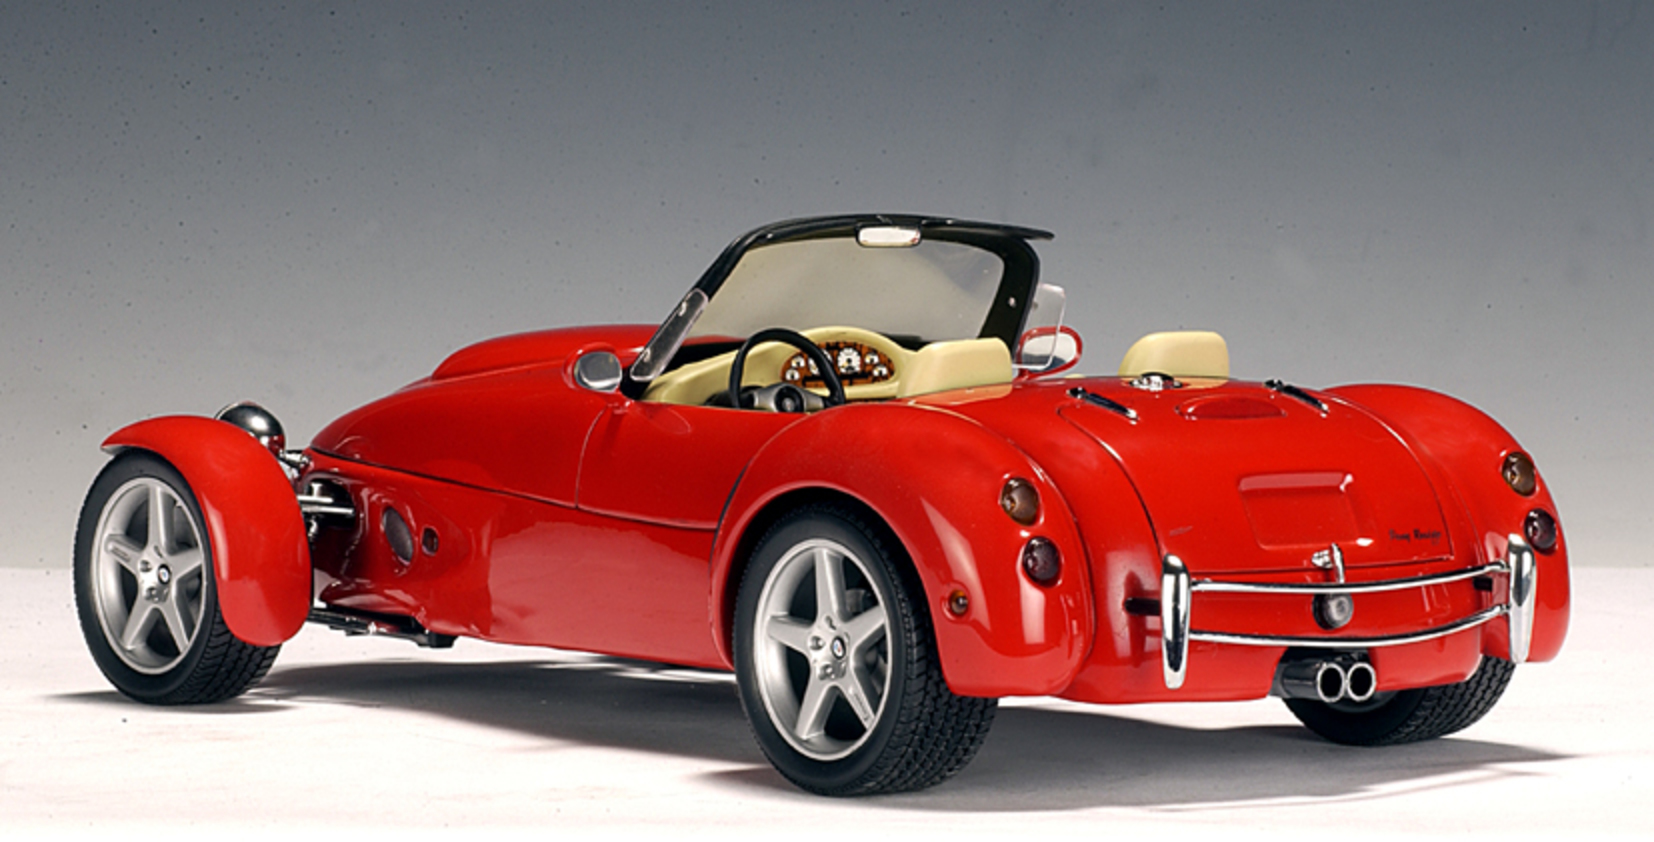 AUTOart: 1998 Panoz Roadster - Red (78211) in 1:18 scale - mDiecast